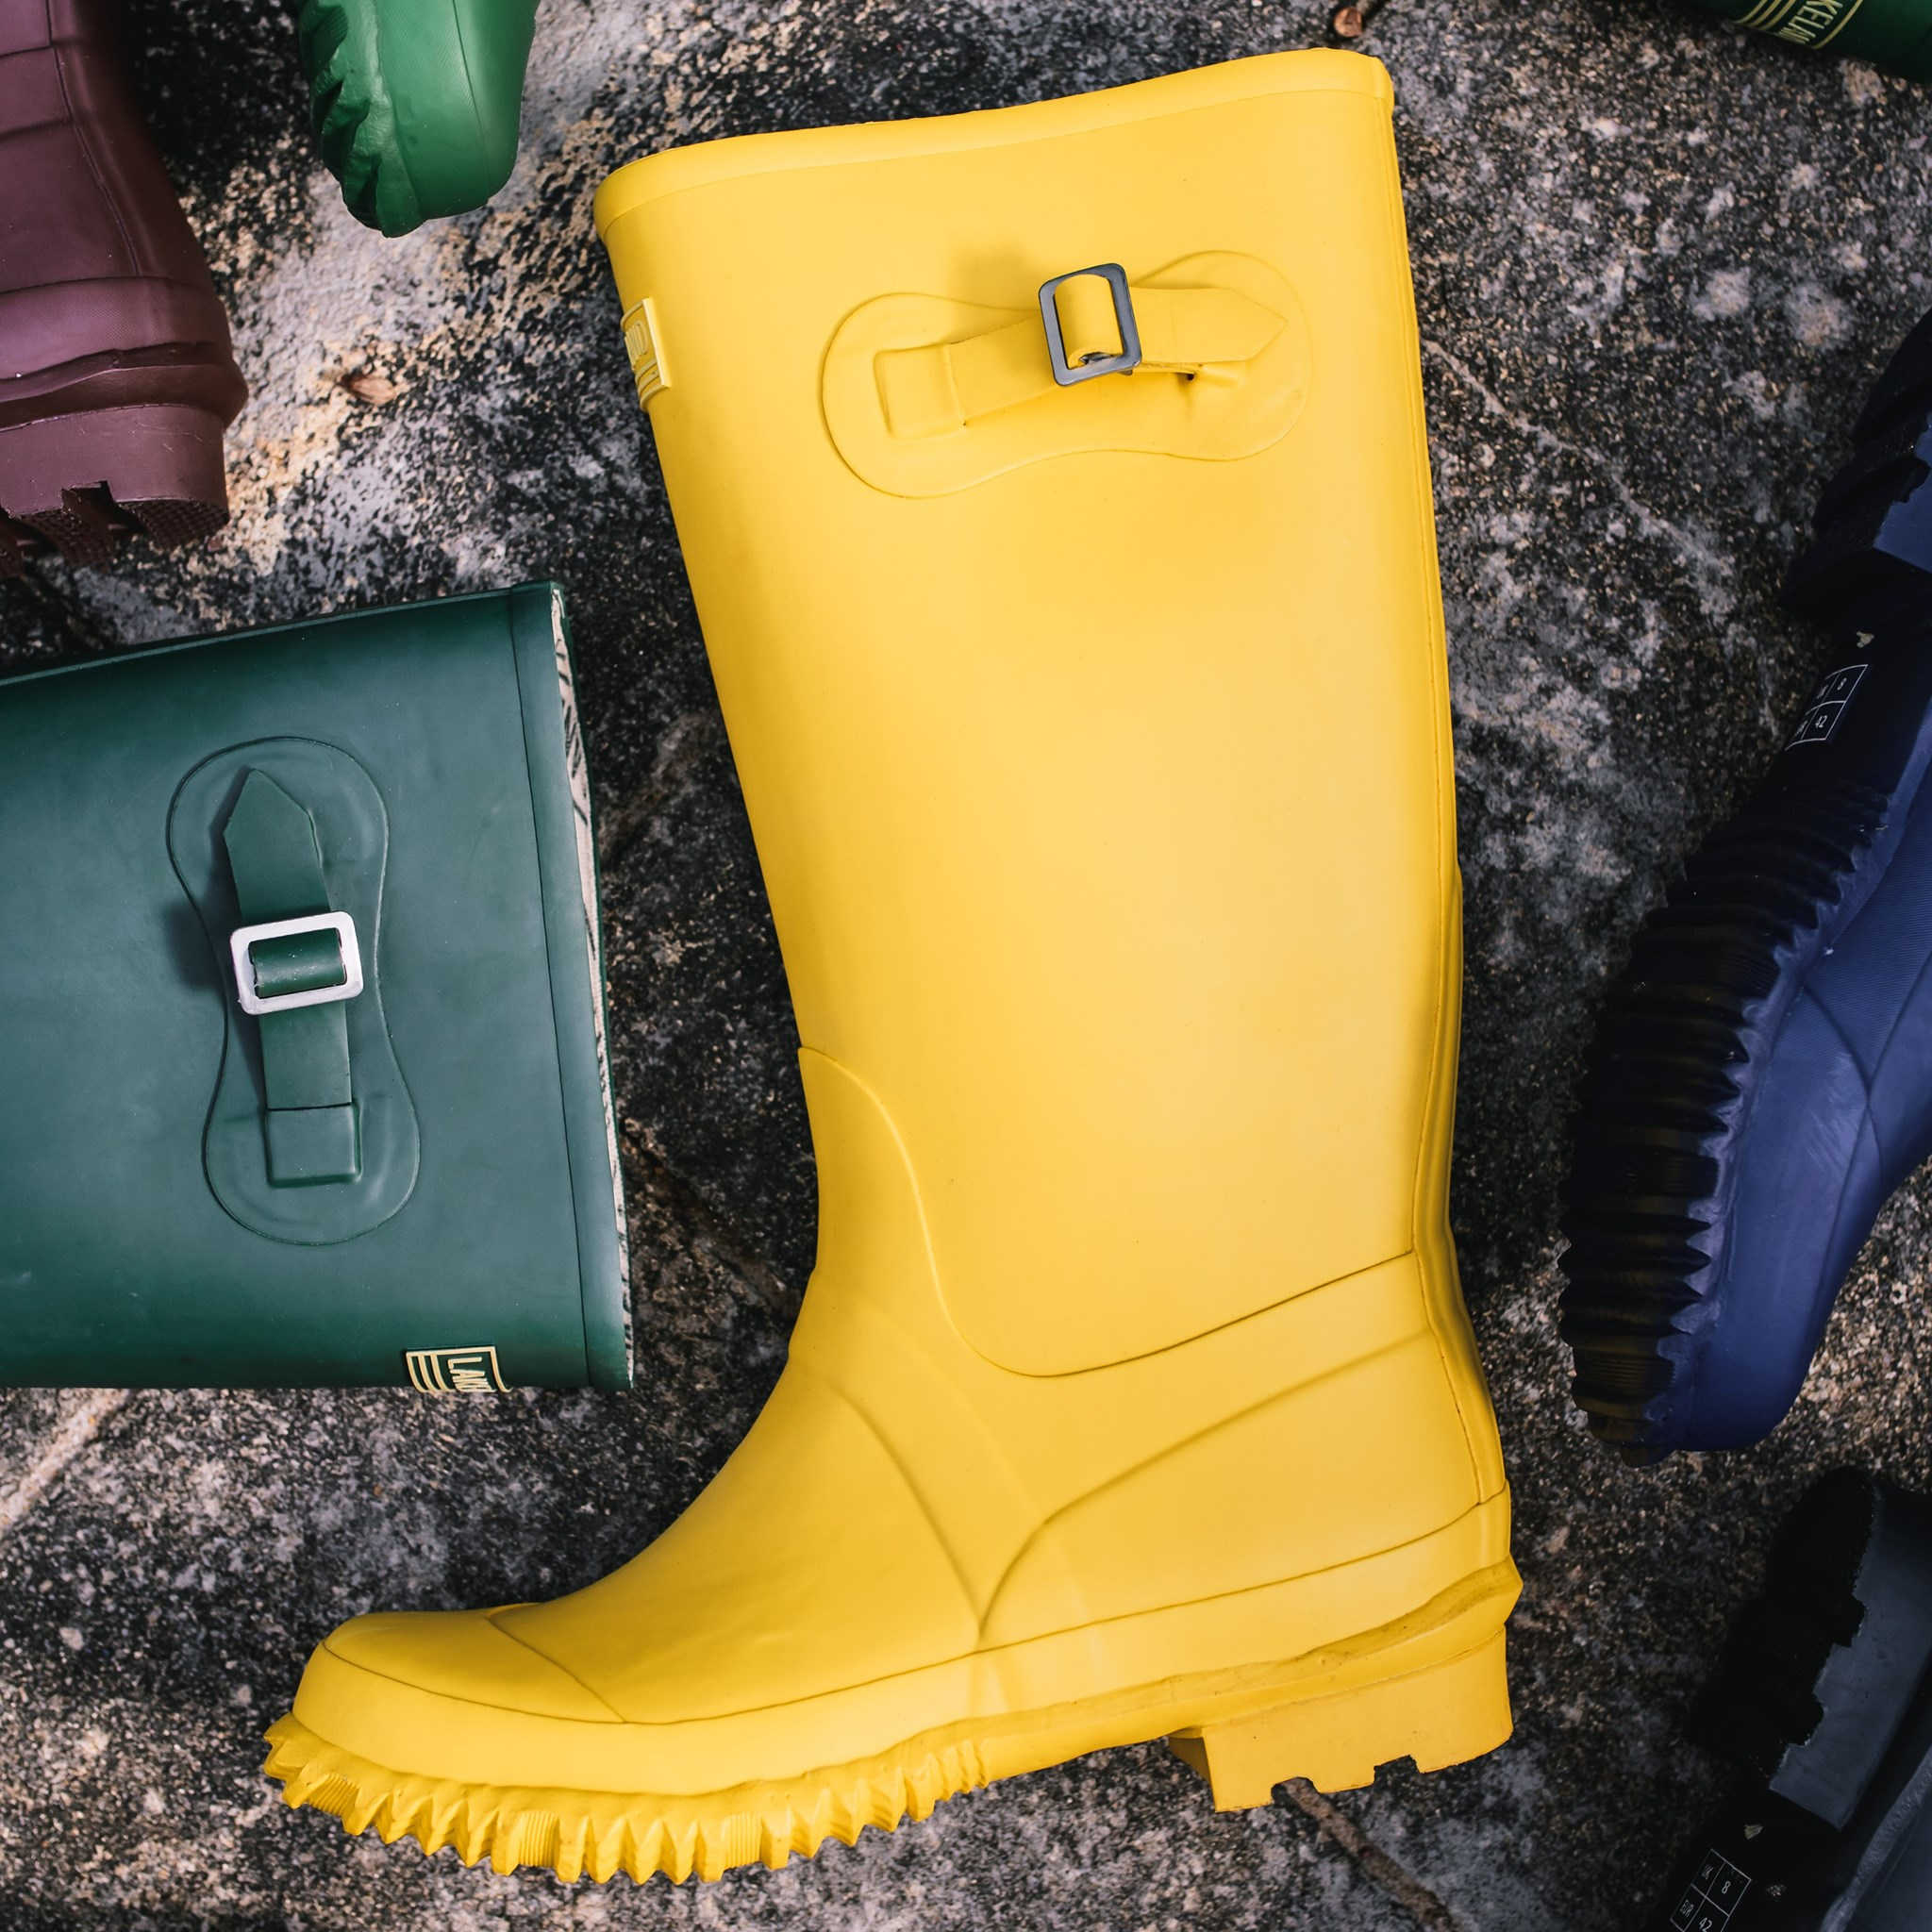 Ethical Wellies: Your Guide To Making A Sustainable Splash - Moral Fibres